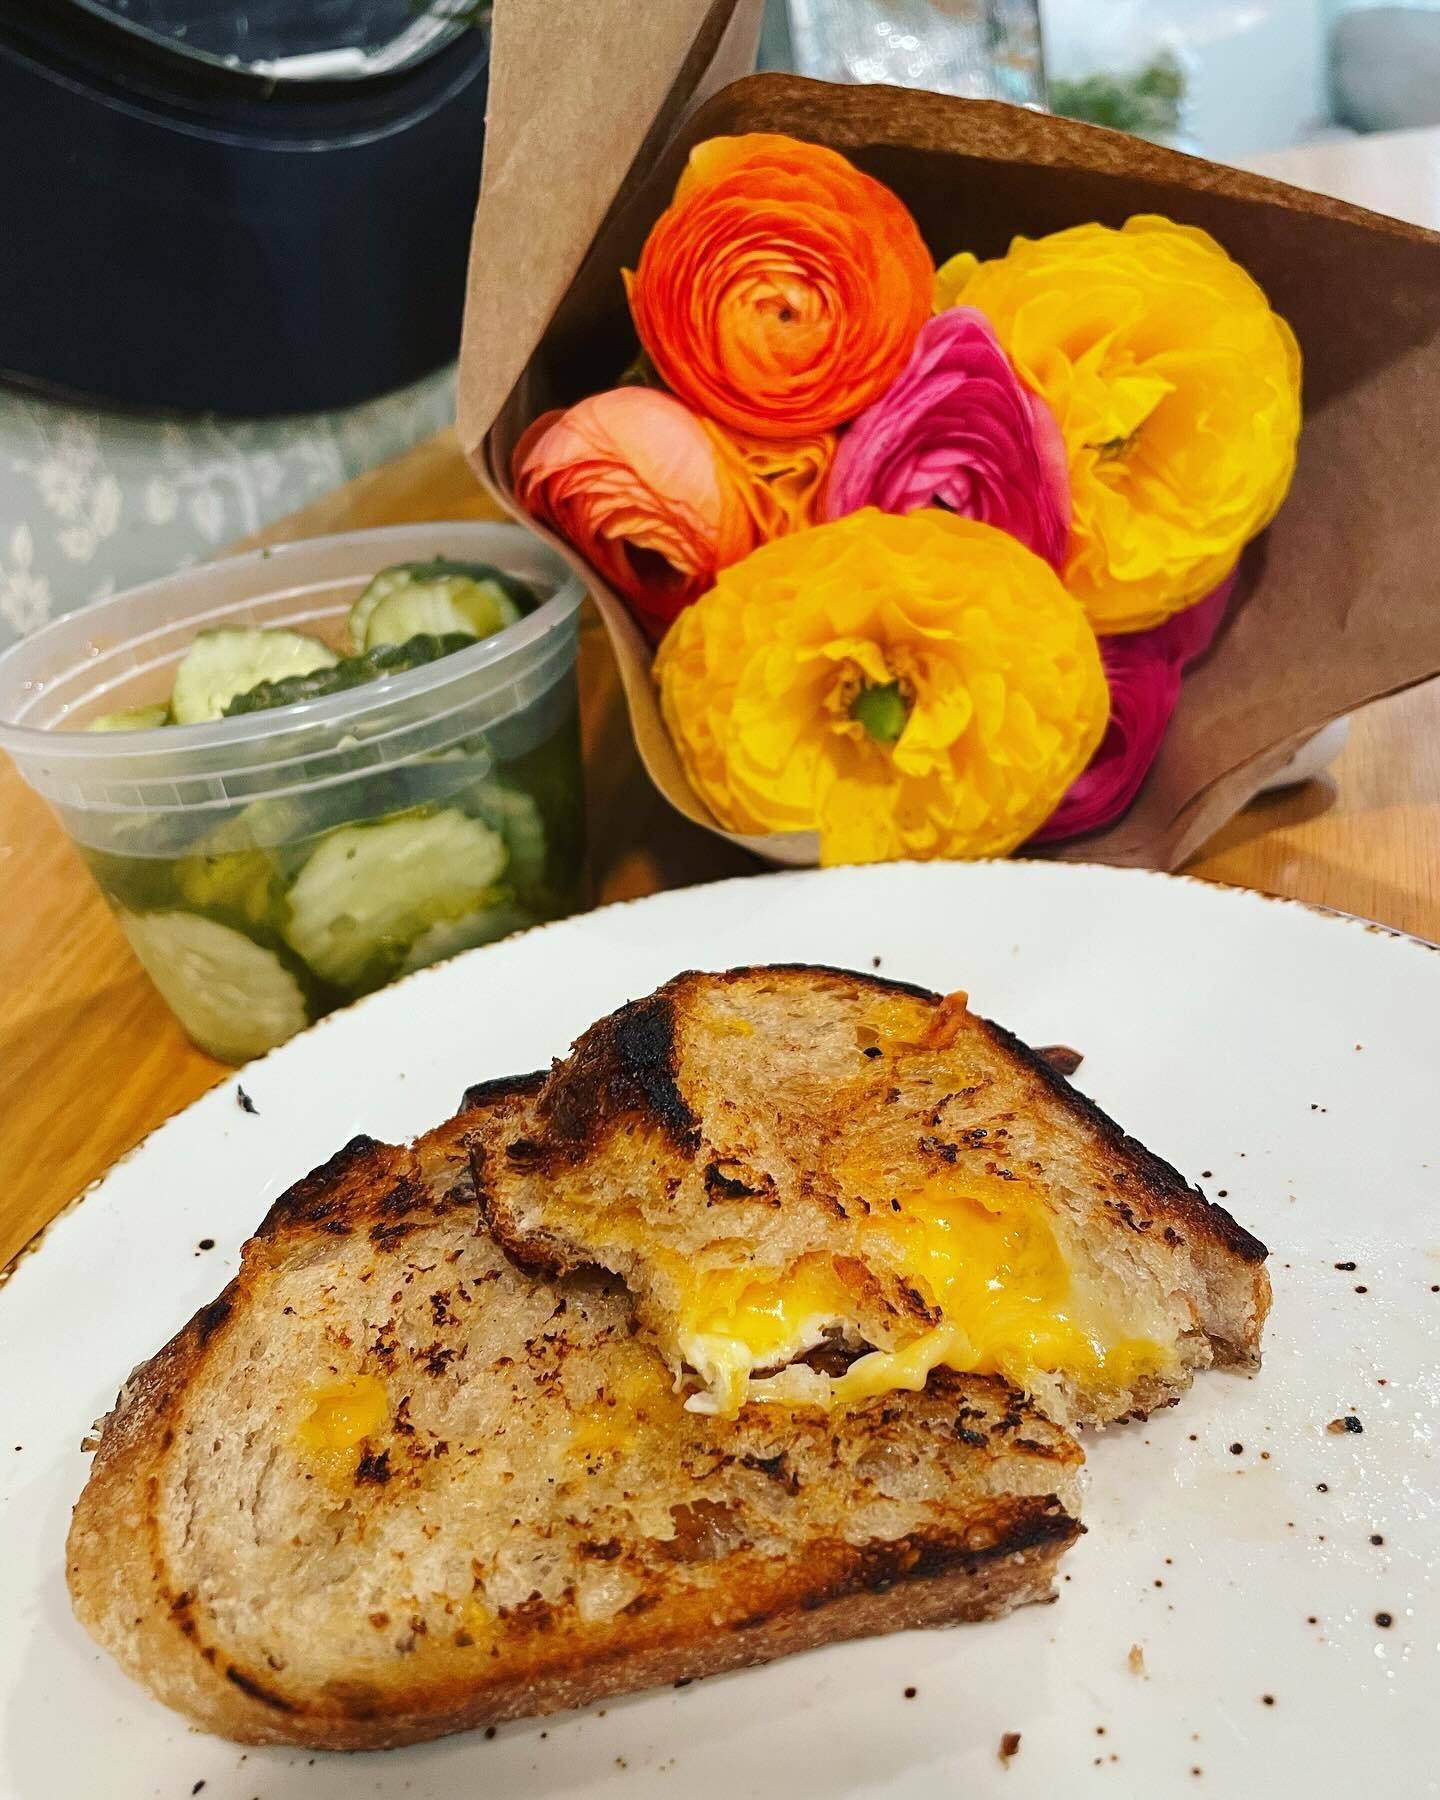 We love our @granvillefarmersmarket for so many reasons especially for all of the amazing vendors 💛 lunch courtesy of 
@710bread 
@thecrazycucumberllc 
 @black.radish.creamery 
@moon_maiden_flowers